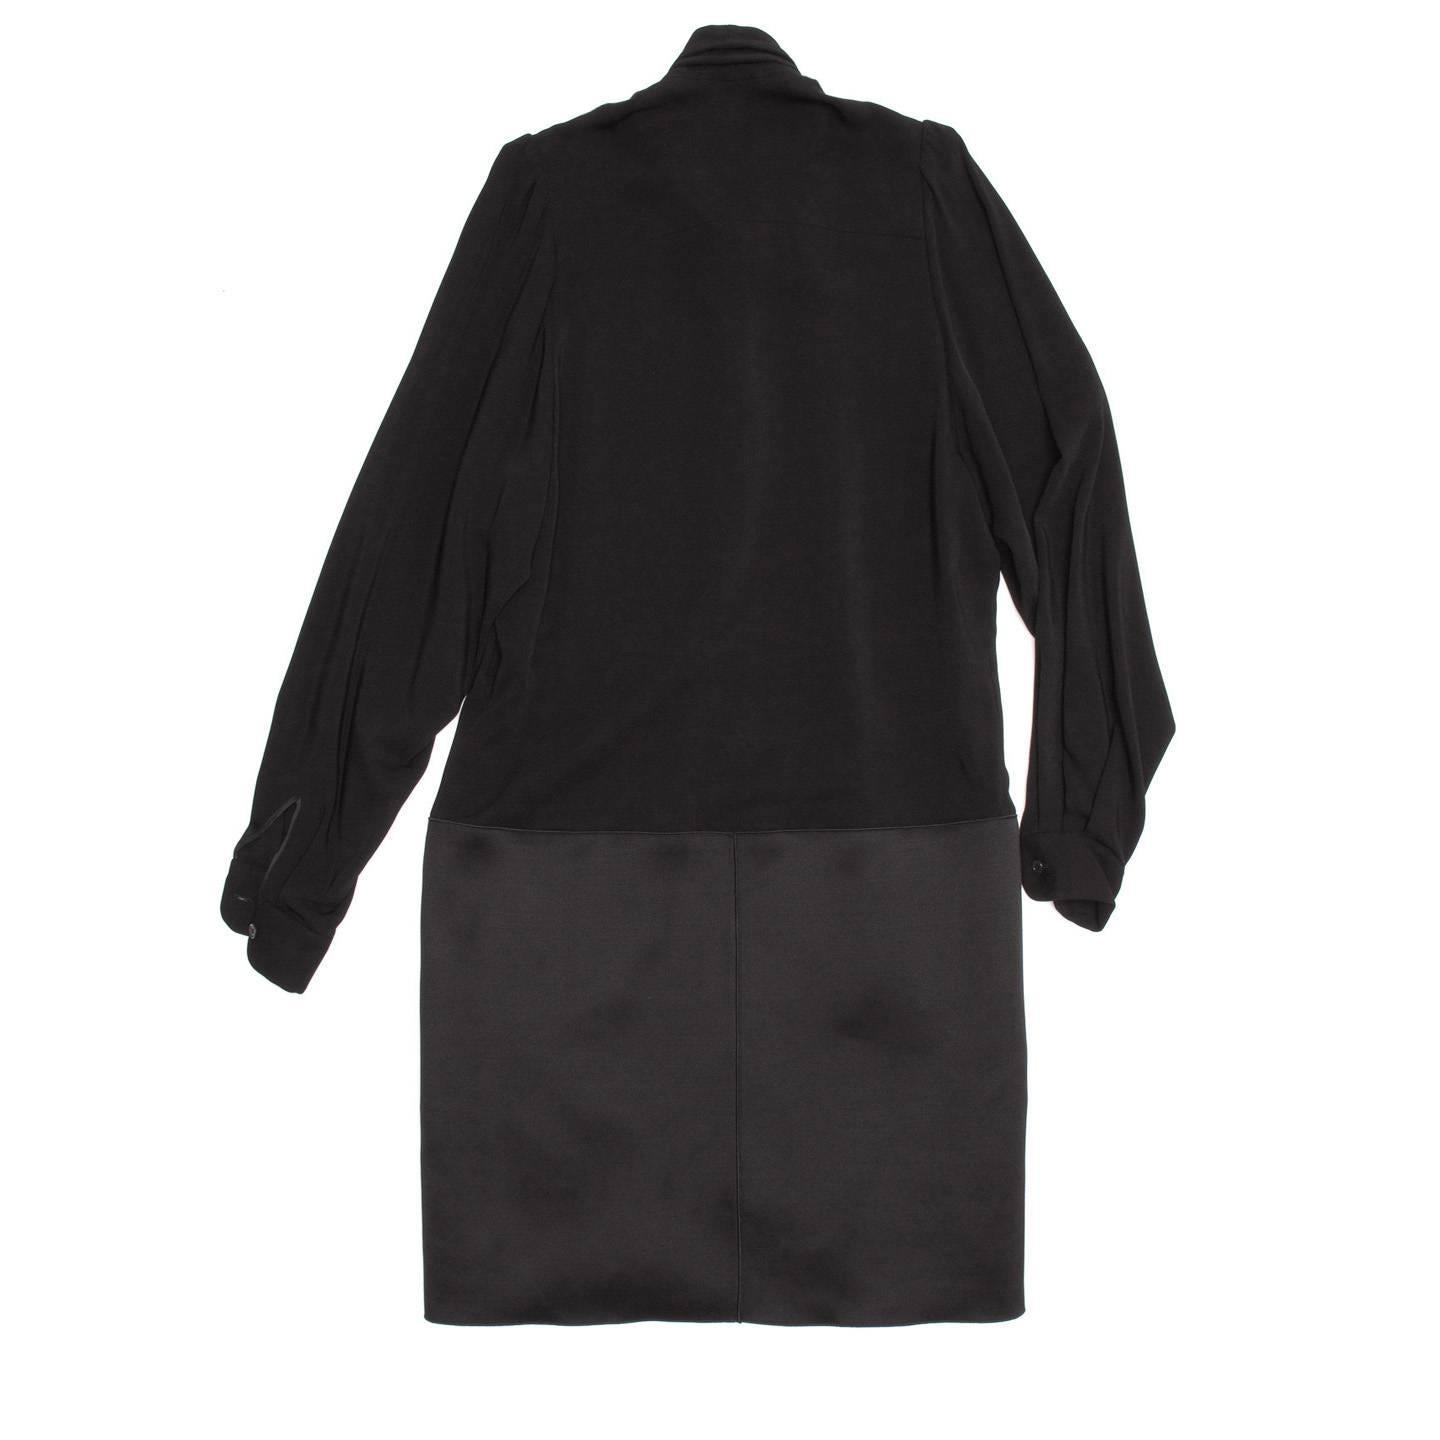 Viscose/wool black long sleeve drop waist dress with tie neck detail and pocketed silk skirt. Made in France. Purchased in Paris.

Size  38 French sizing

Condition  Excellent: never worn with tags